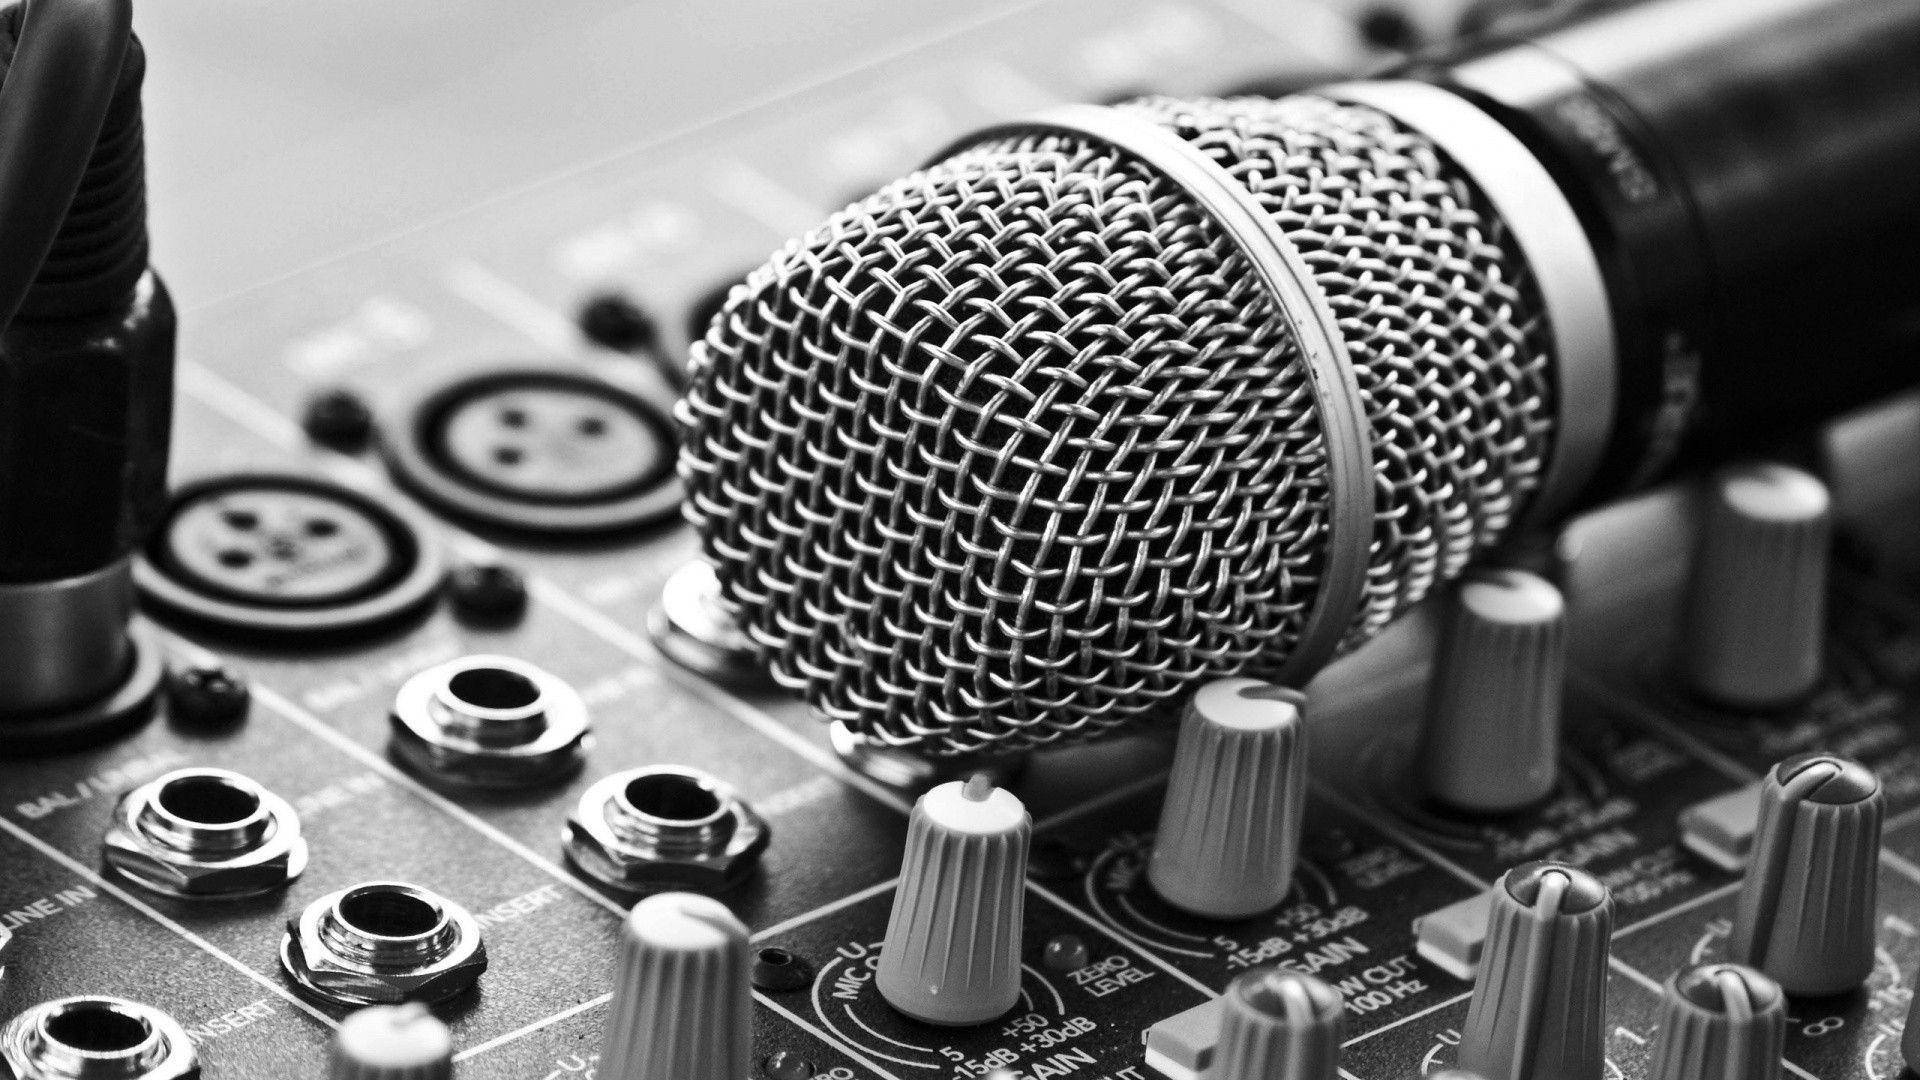 Microphoneand Sound Mixer Equipment SVG